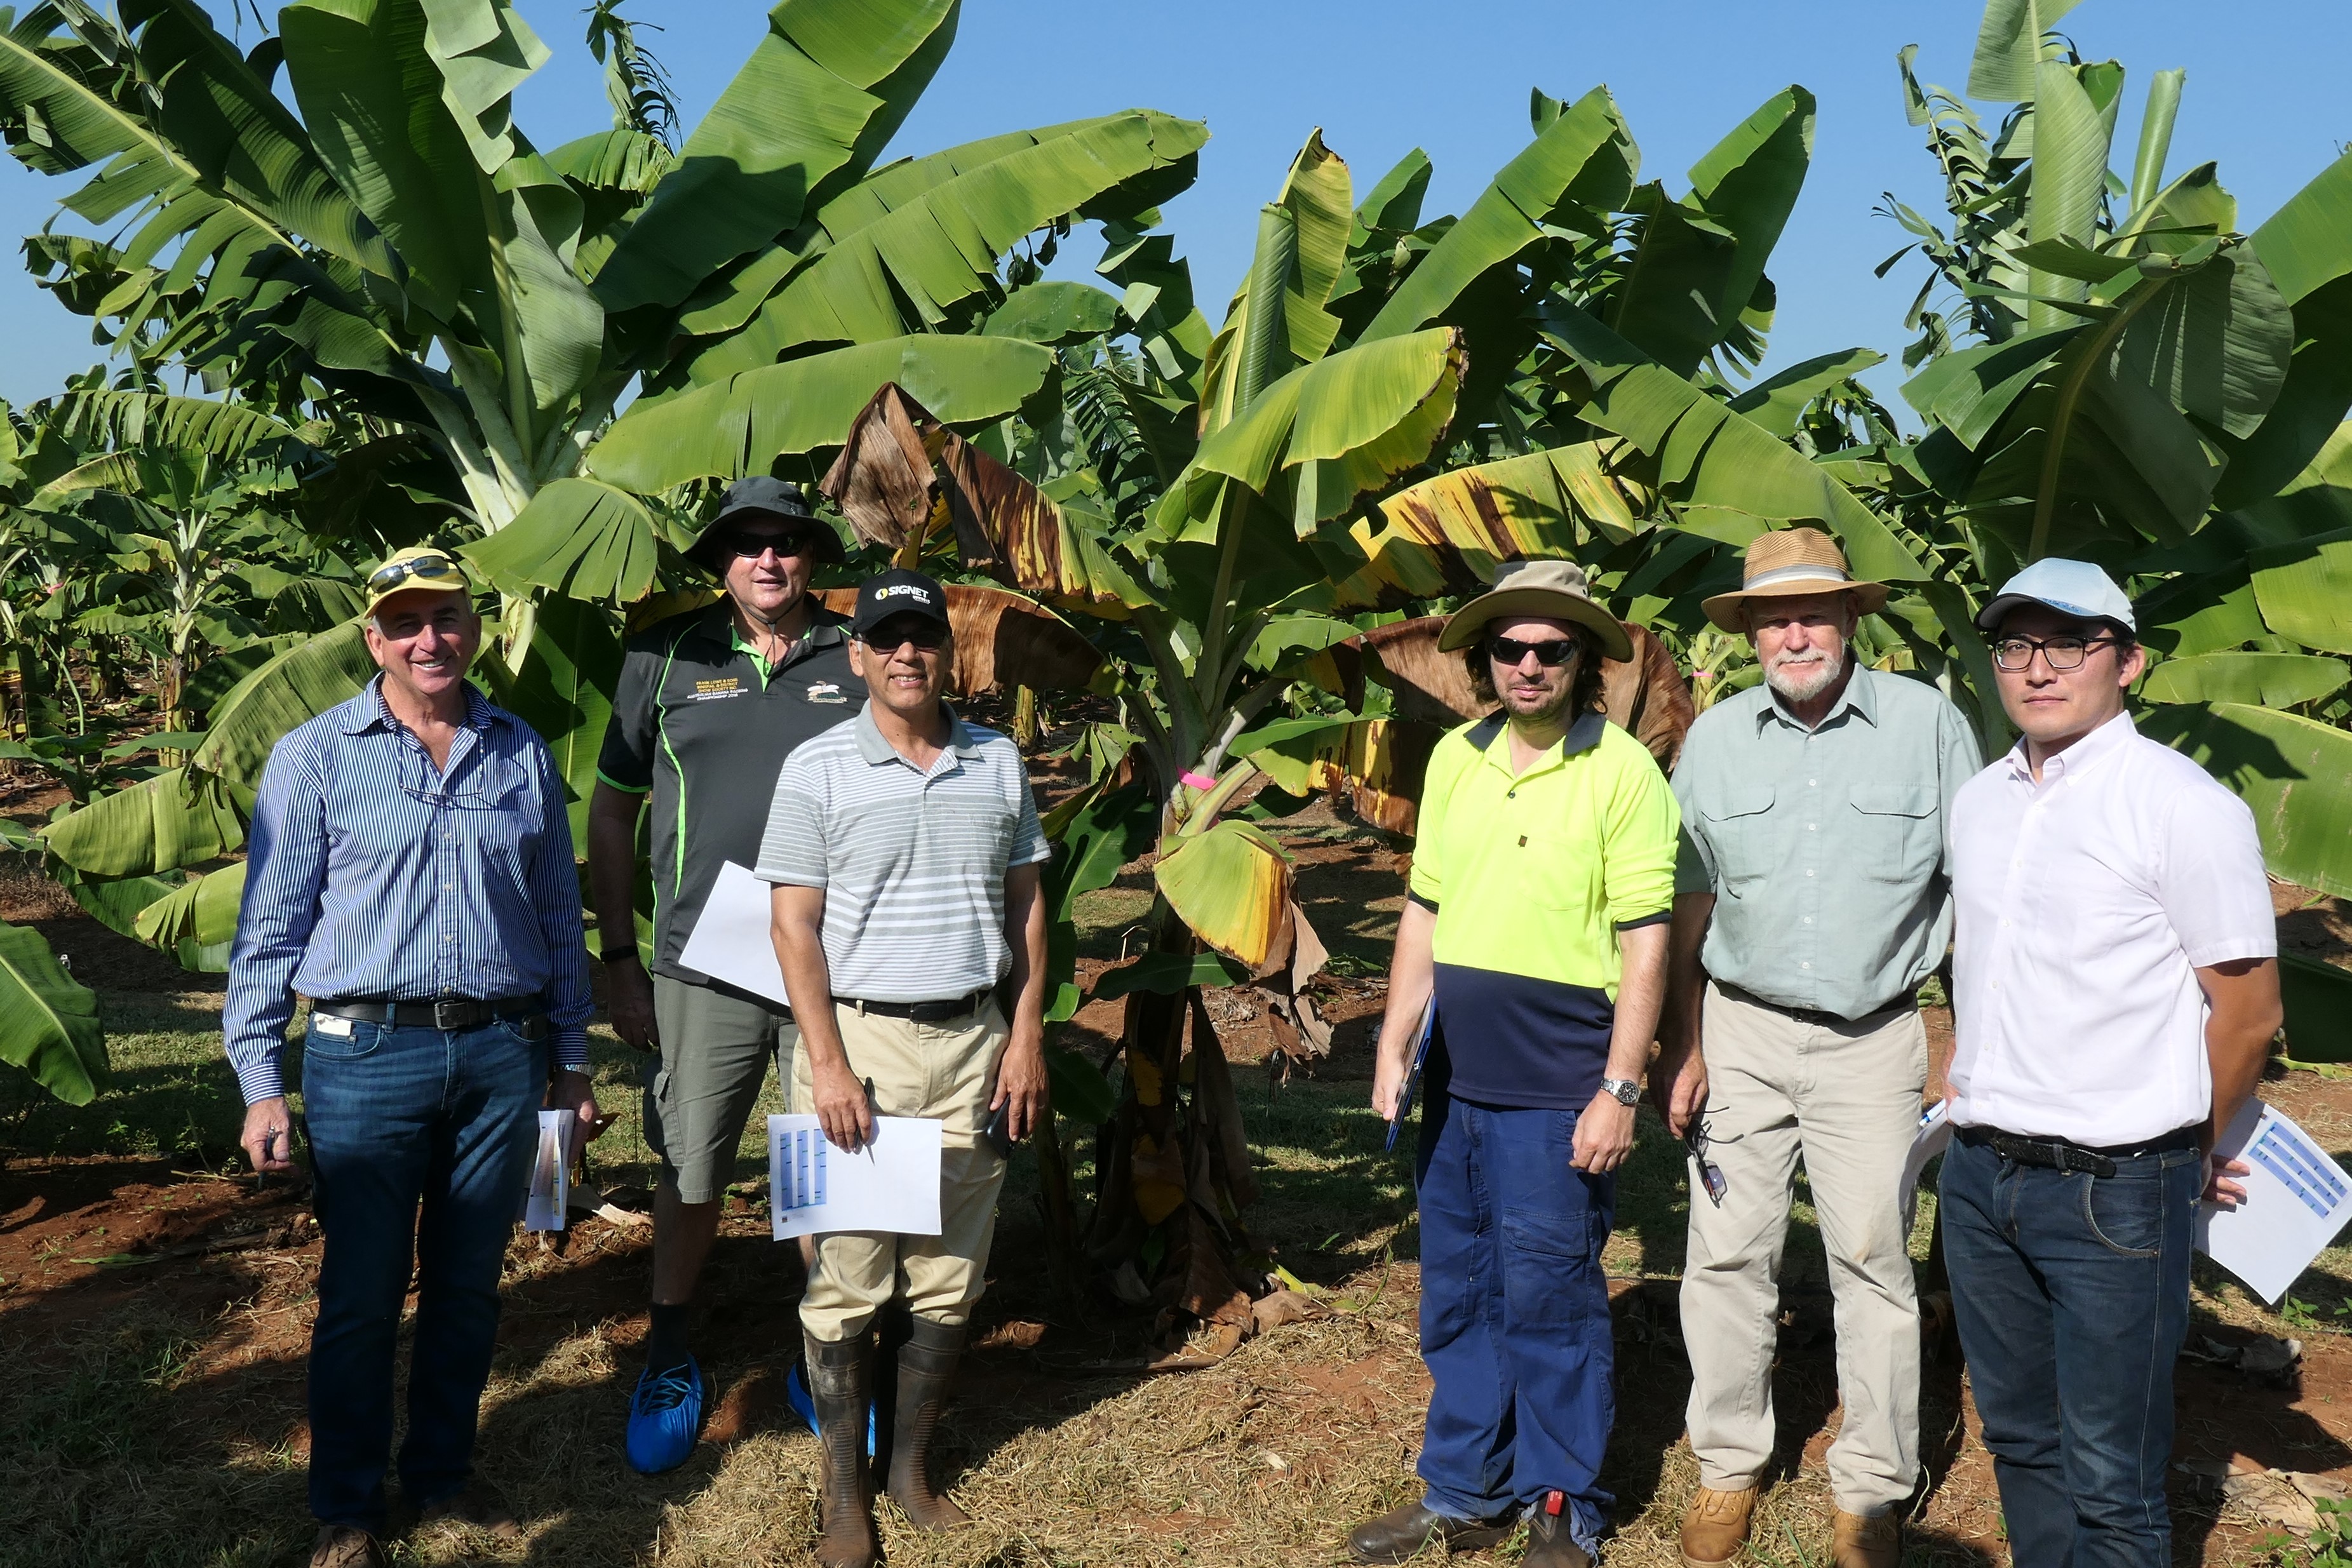 Following the Australian Banana Industry Congress in May a few delegates, including some from overseas, visited the TR4 disease screening sites at Coastal Plains
Research Farm, NT. They were impressed with trial progress, saying the ‘world is watching’ Australia’s efforts to curb the effects of this global menace with interest.
L-R: Marc Jackson (Fyffes, Costa Rica), Stewart Lindsay (Queensland DAF), Roberto Young (Dole, Honduras), Sharl Mintoff (NTDPIR), Bob Williams (consultant) and
Yuji Habomoto (Fyffes, Costa Rica).